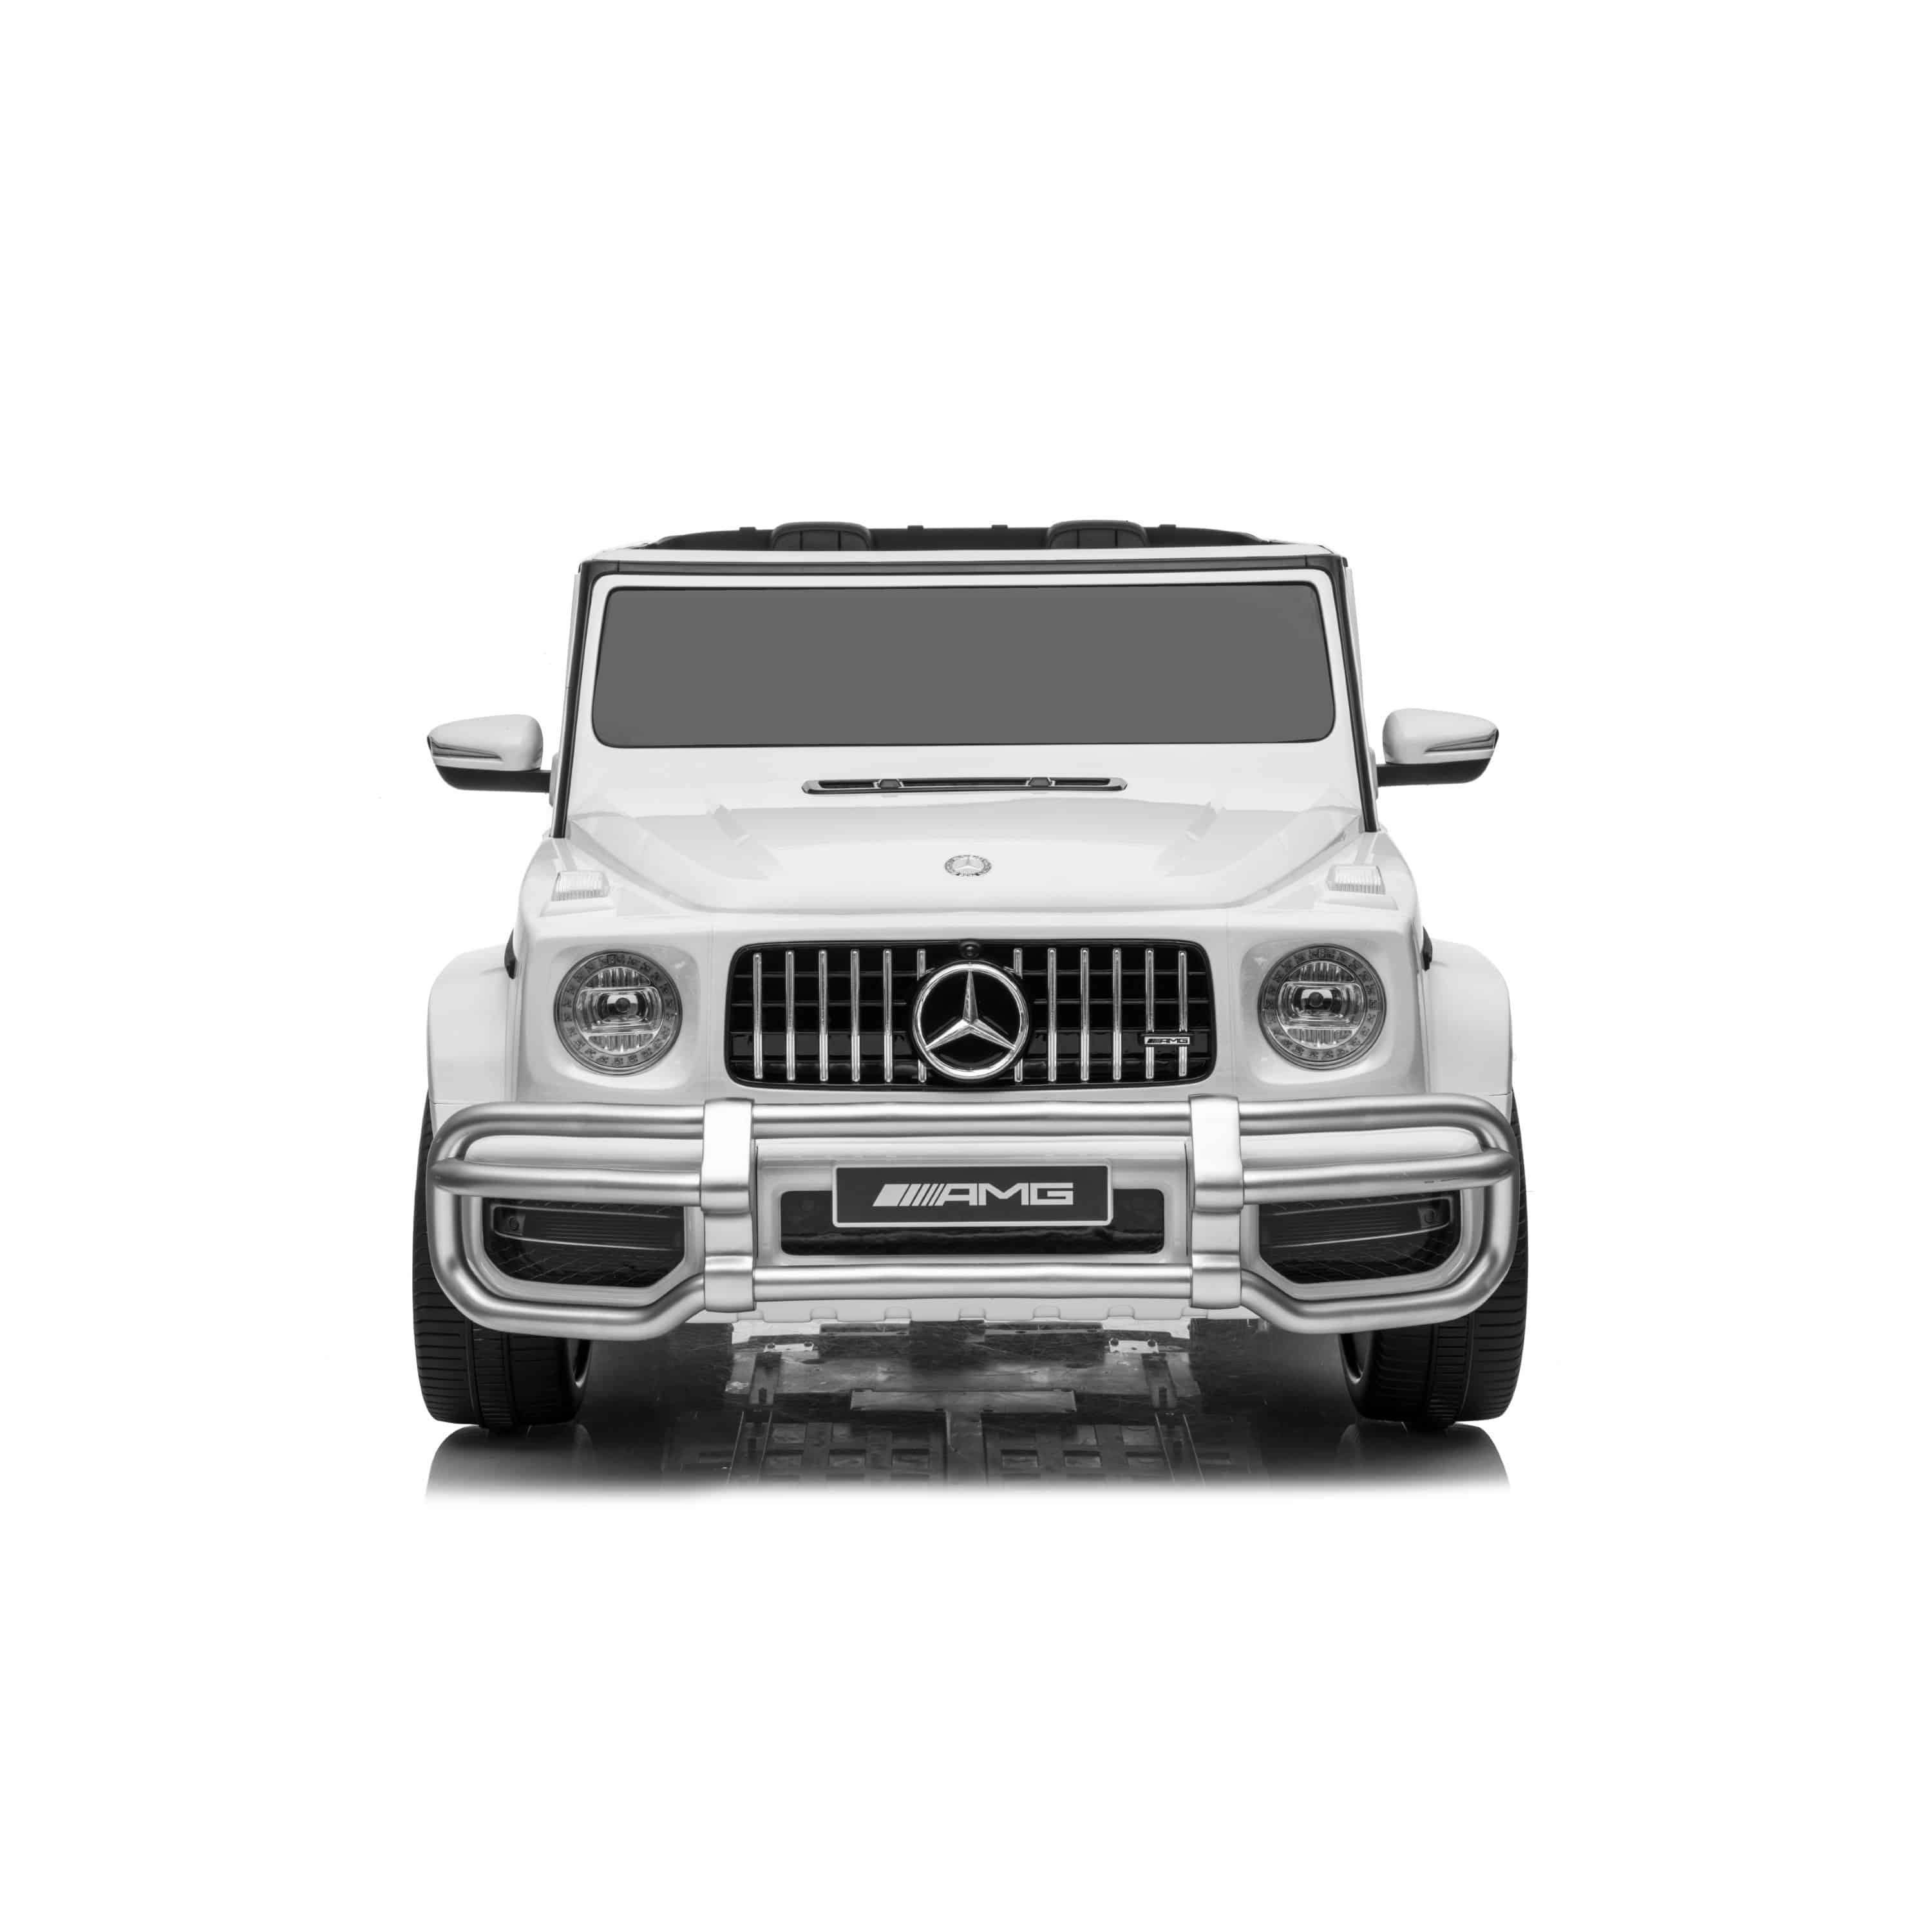 24V 4x4 Mercedes G63 AMG 2 Seater Ride on Car Kids Cars CA - Ride On Toys Store